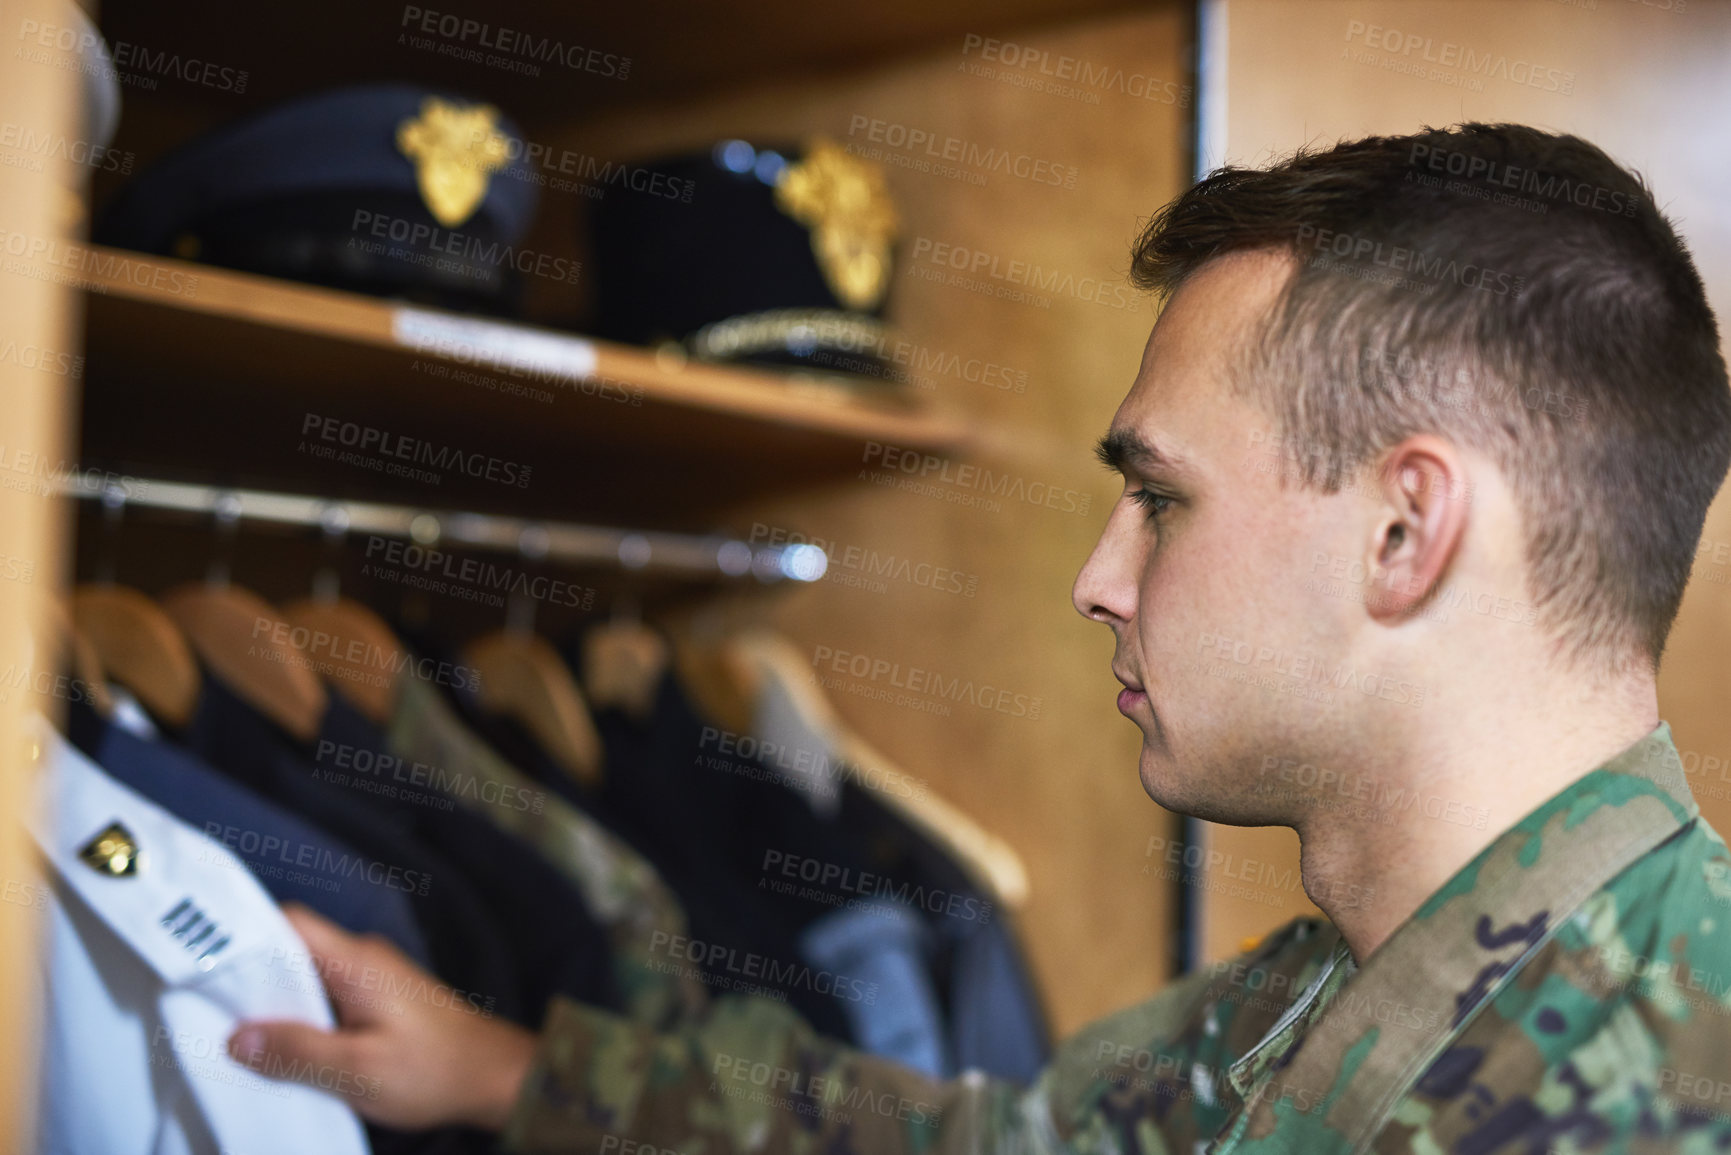 Buy stock photo Shot of a young soldier standing getting dressed in the dorms of a military academy